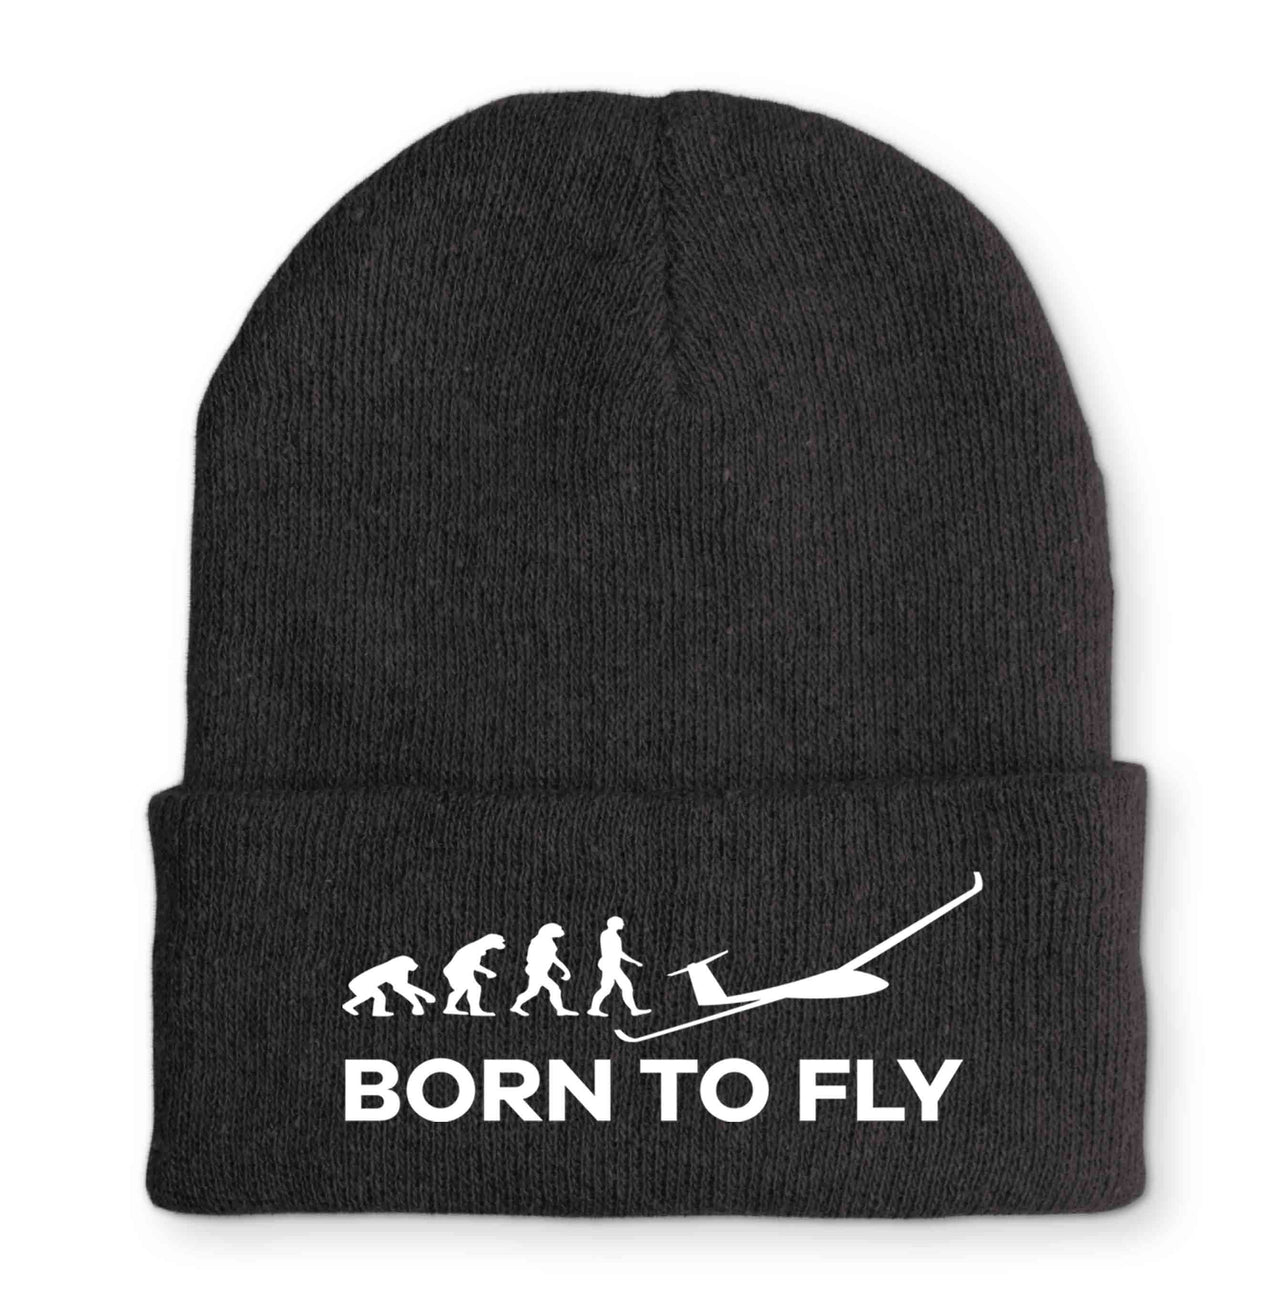 Born To Fly Glider Embroidered Beanies